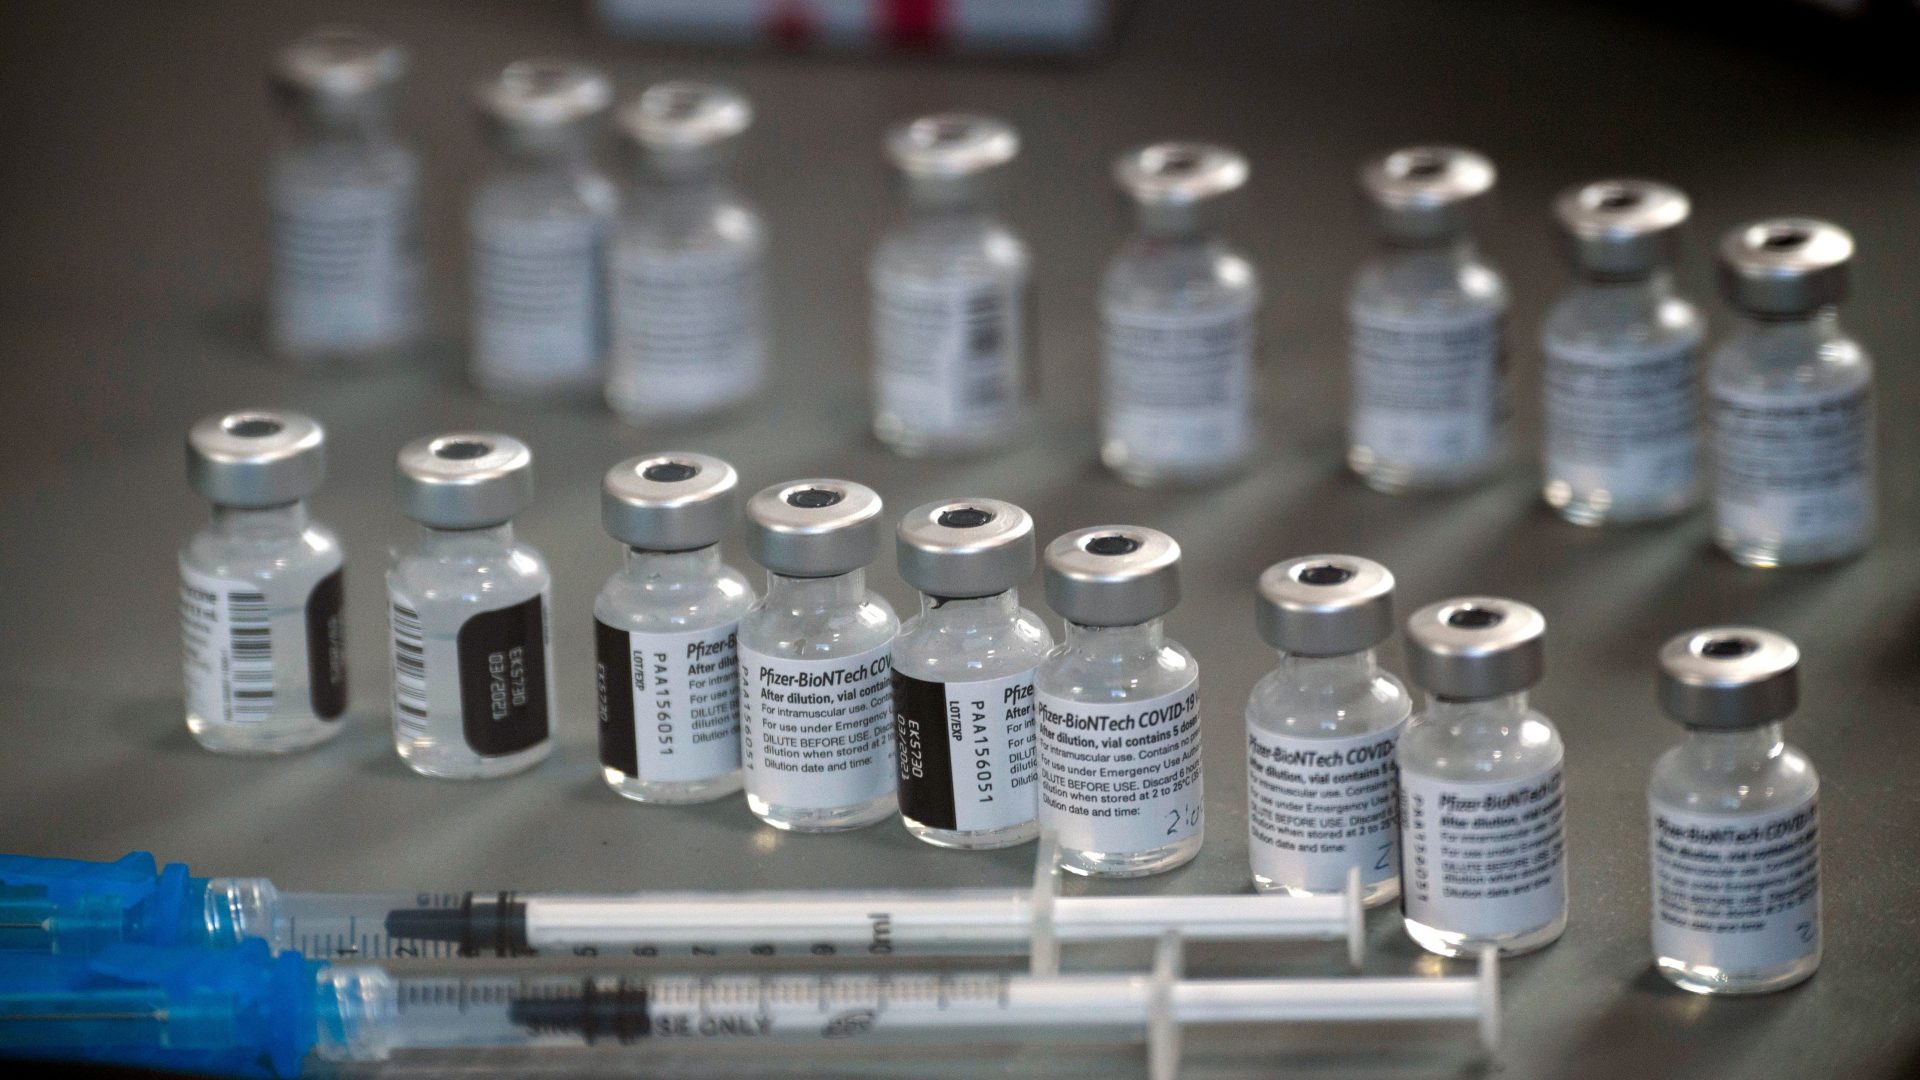 Pfizer says millions of vaccine doses are ready, but